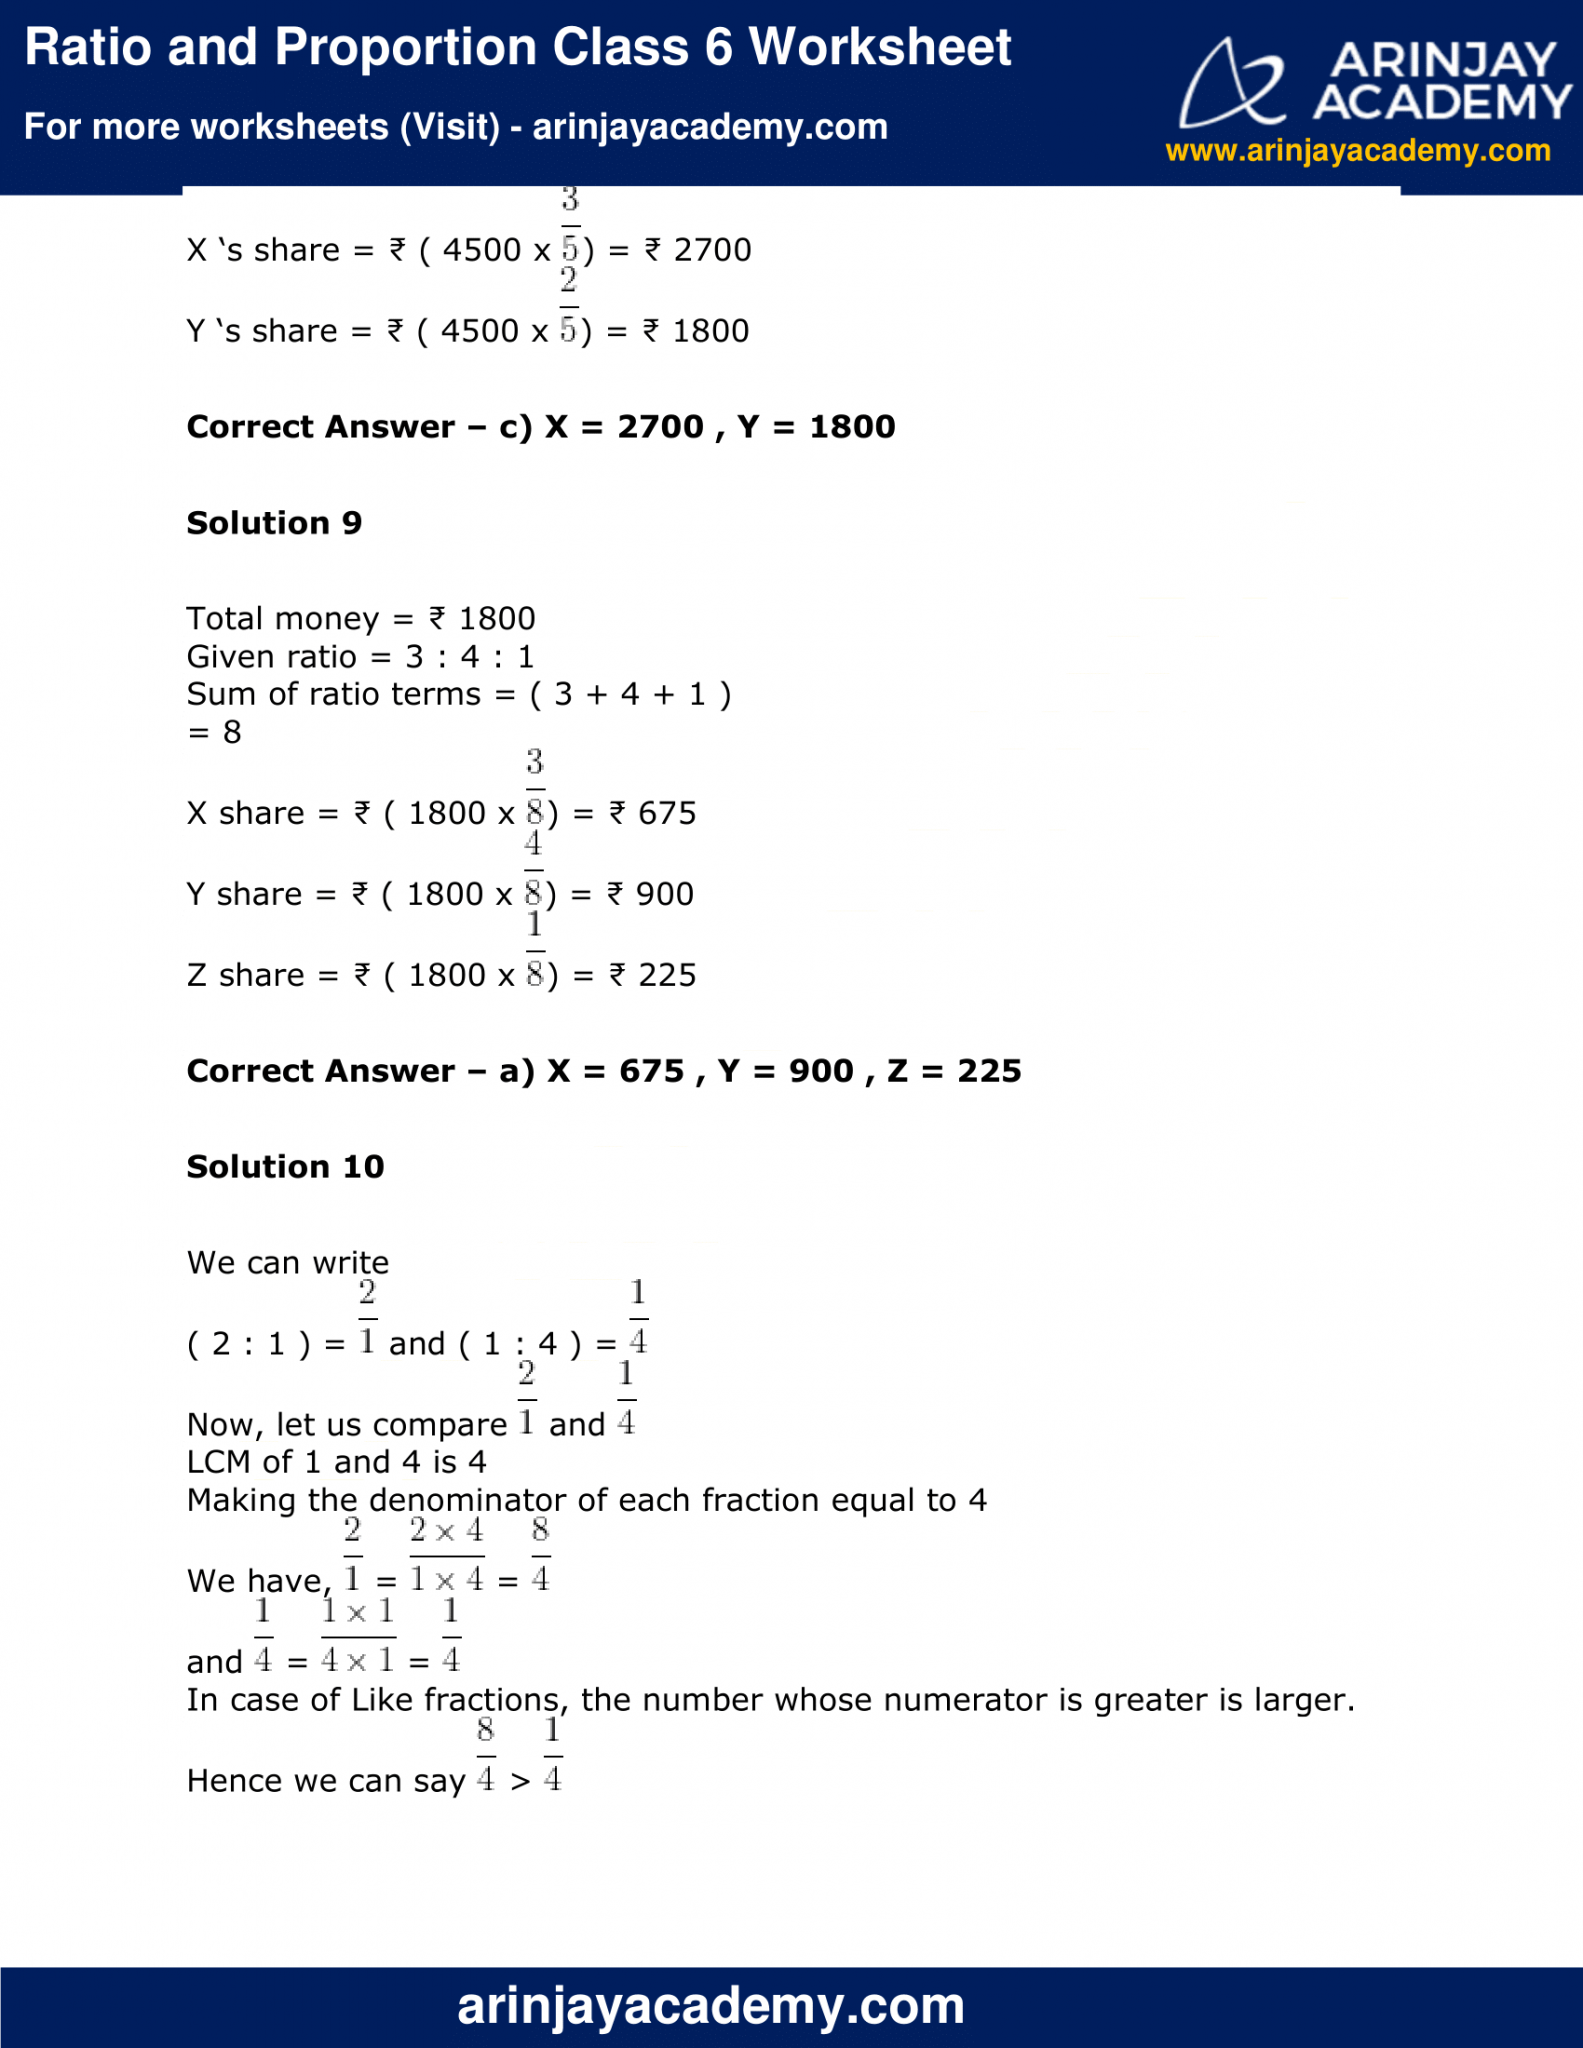 Ratio and Proportion Class 6 Worksheet - Arinjay Academy